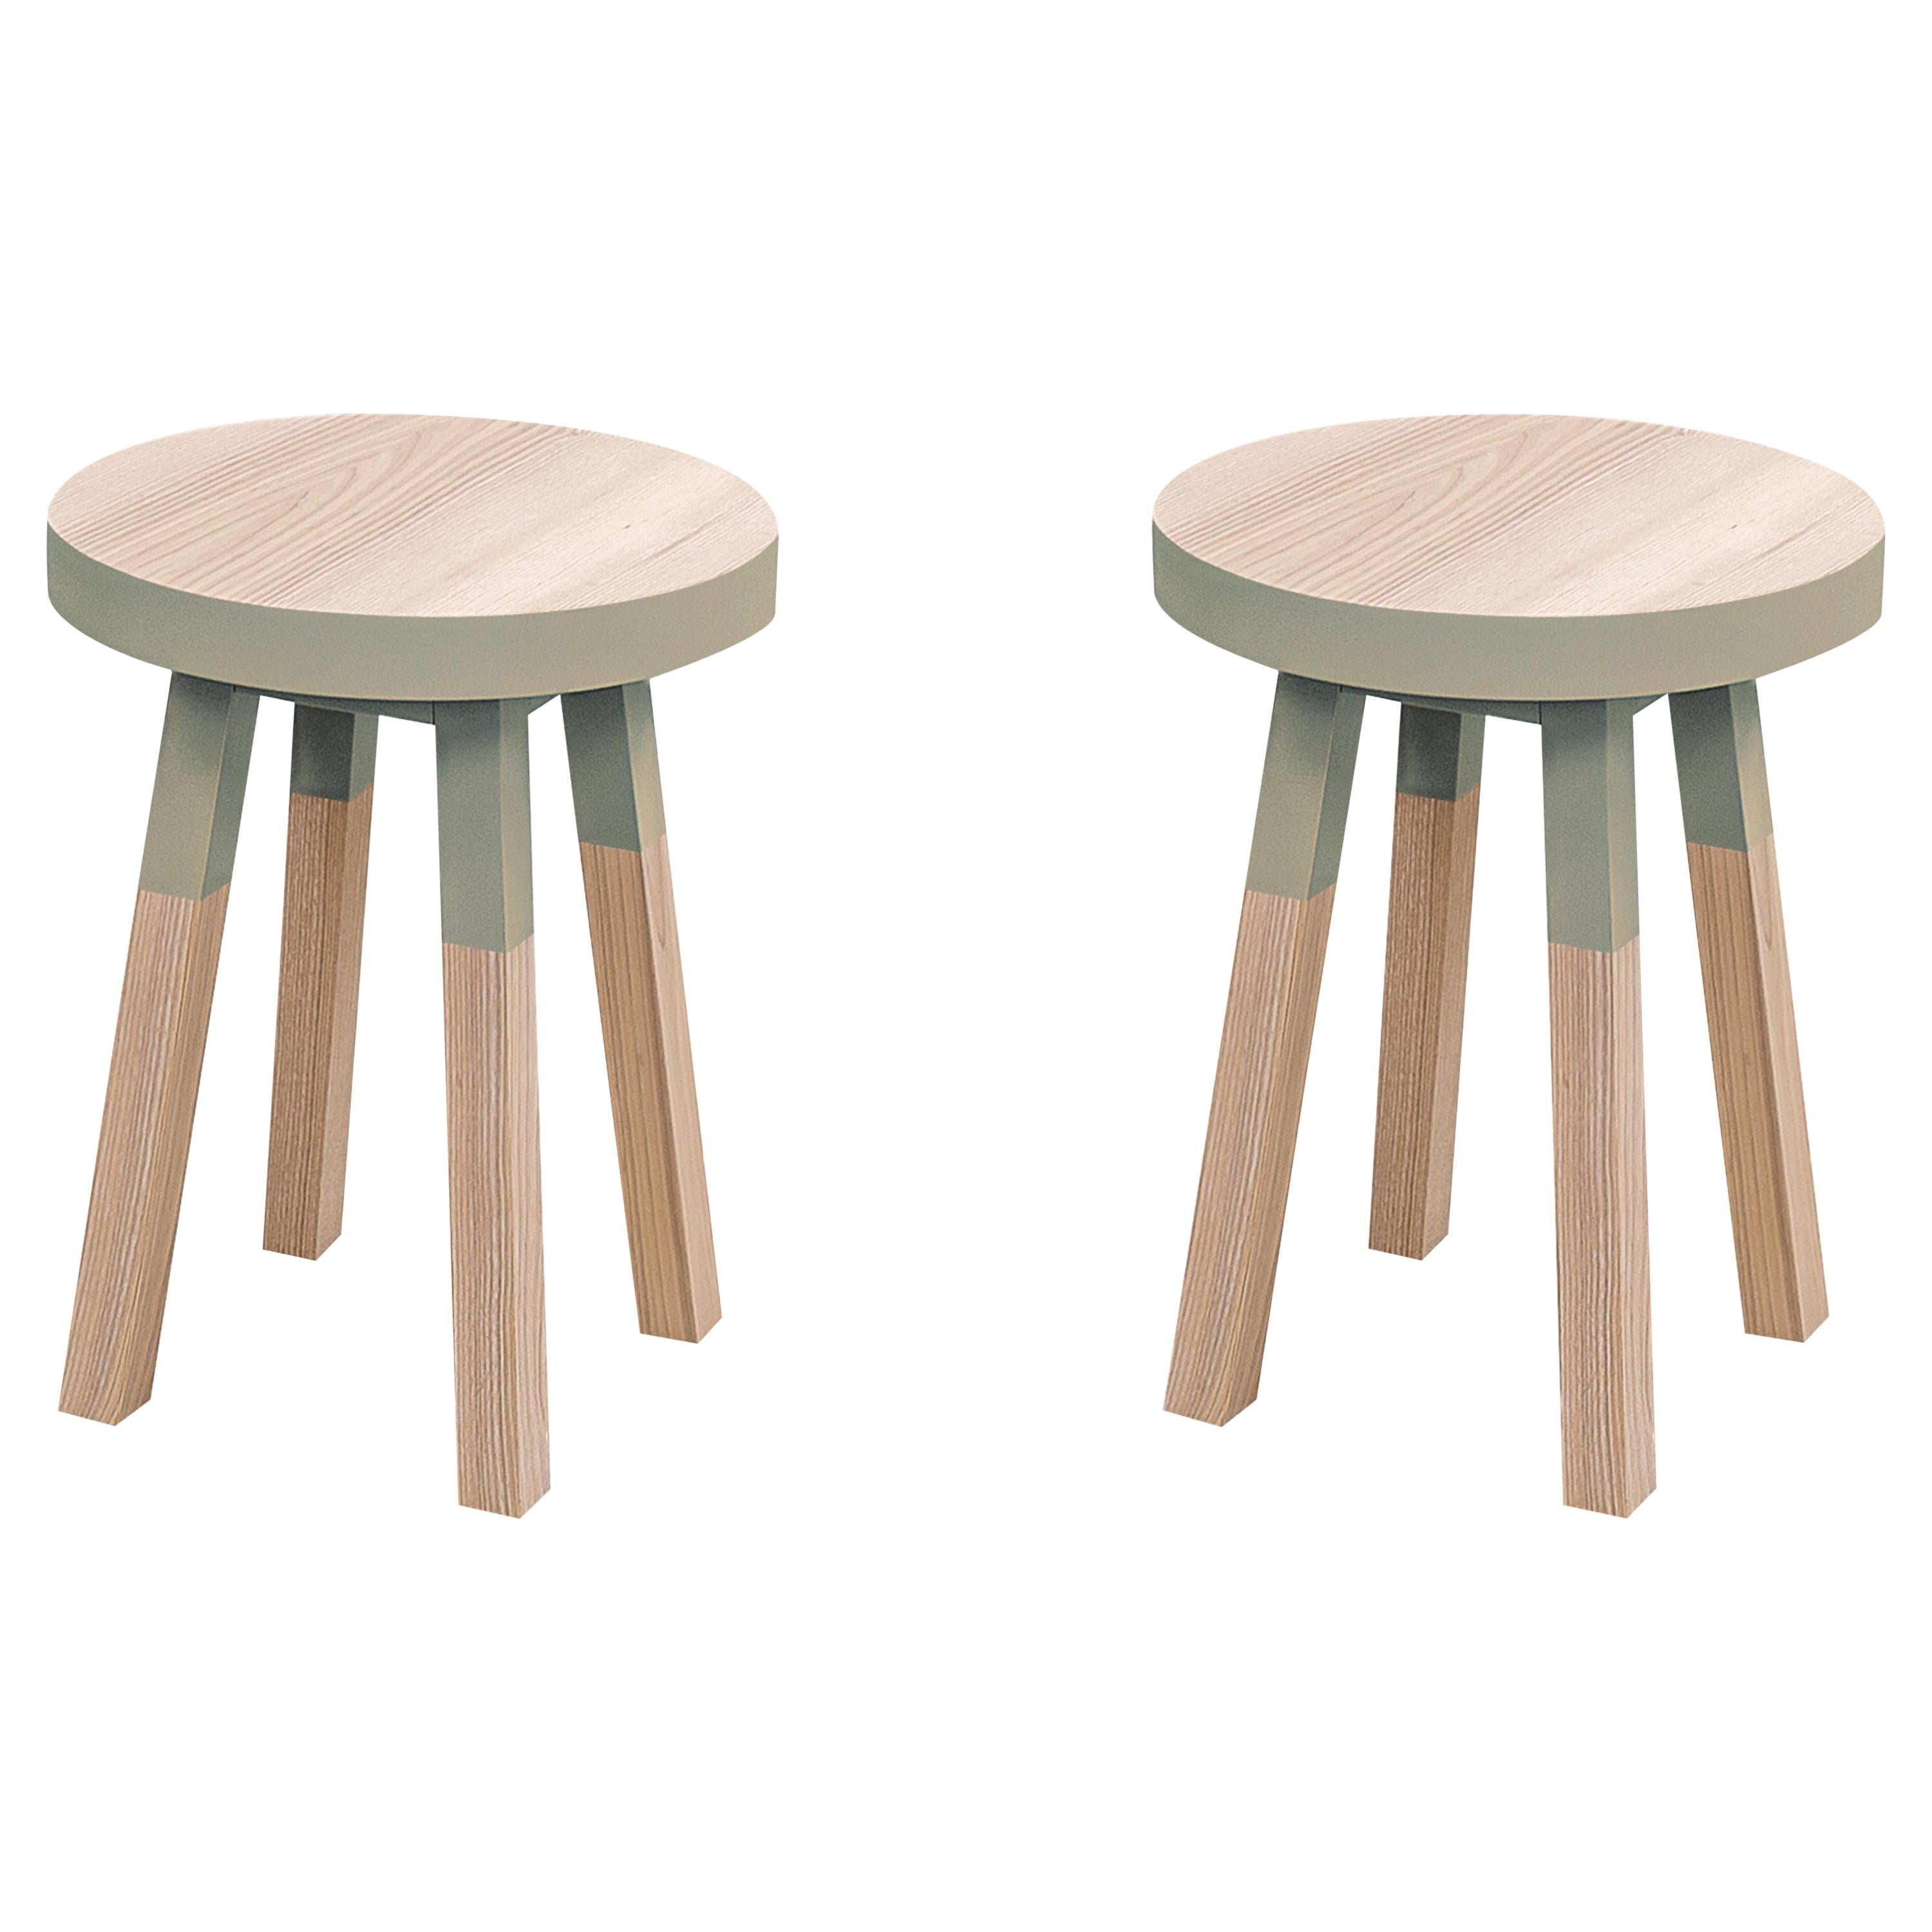 Pair of Stools in Ash Wood, Design by Eric Gizard, 100% Made in France